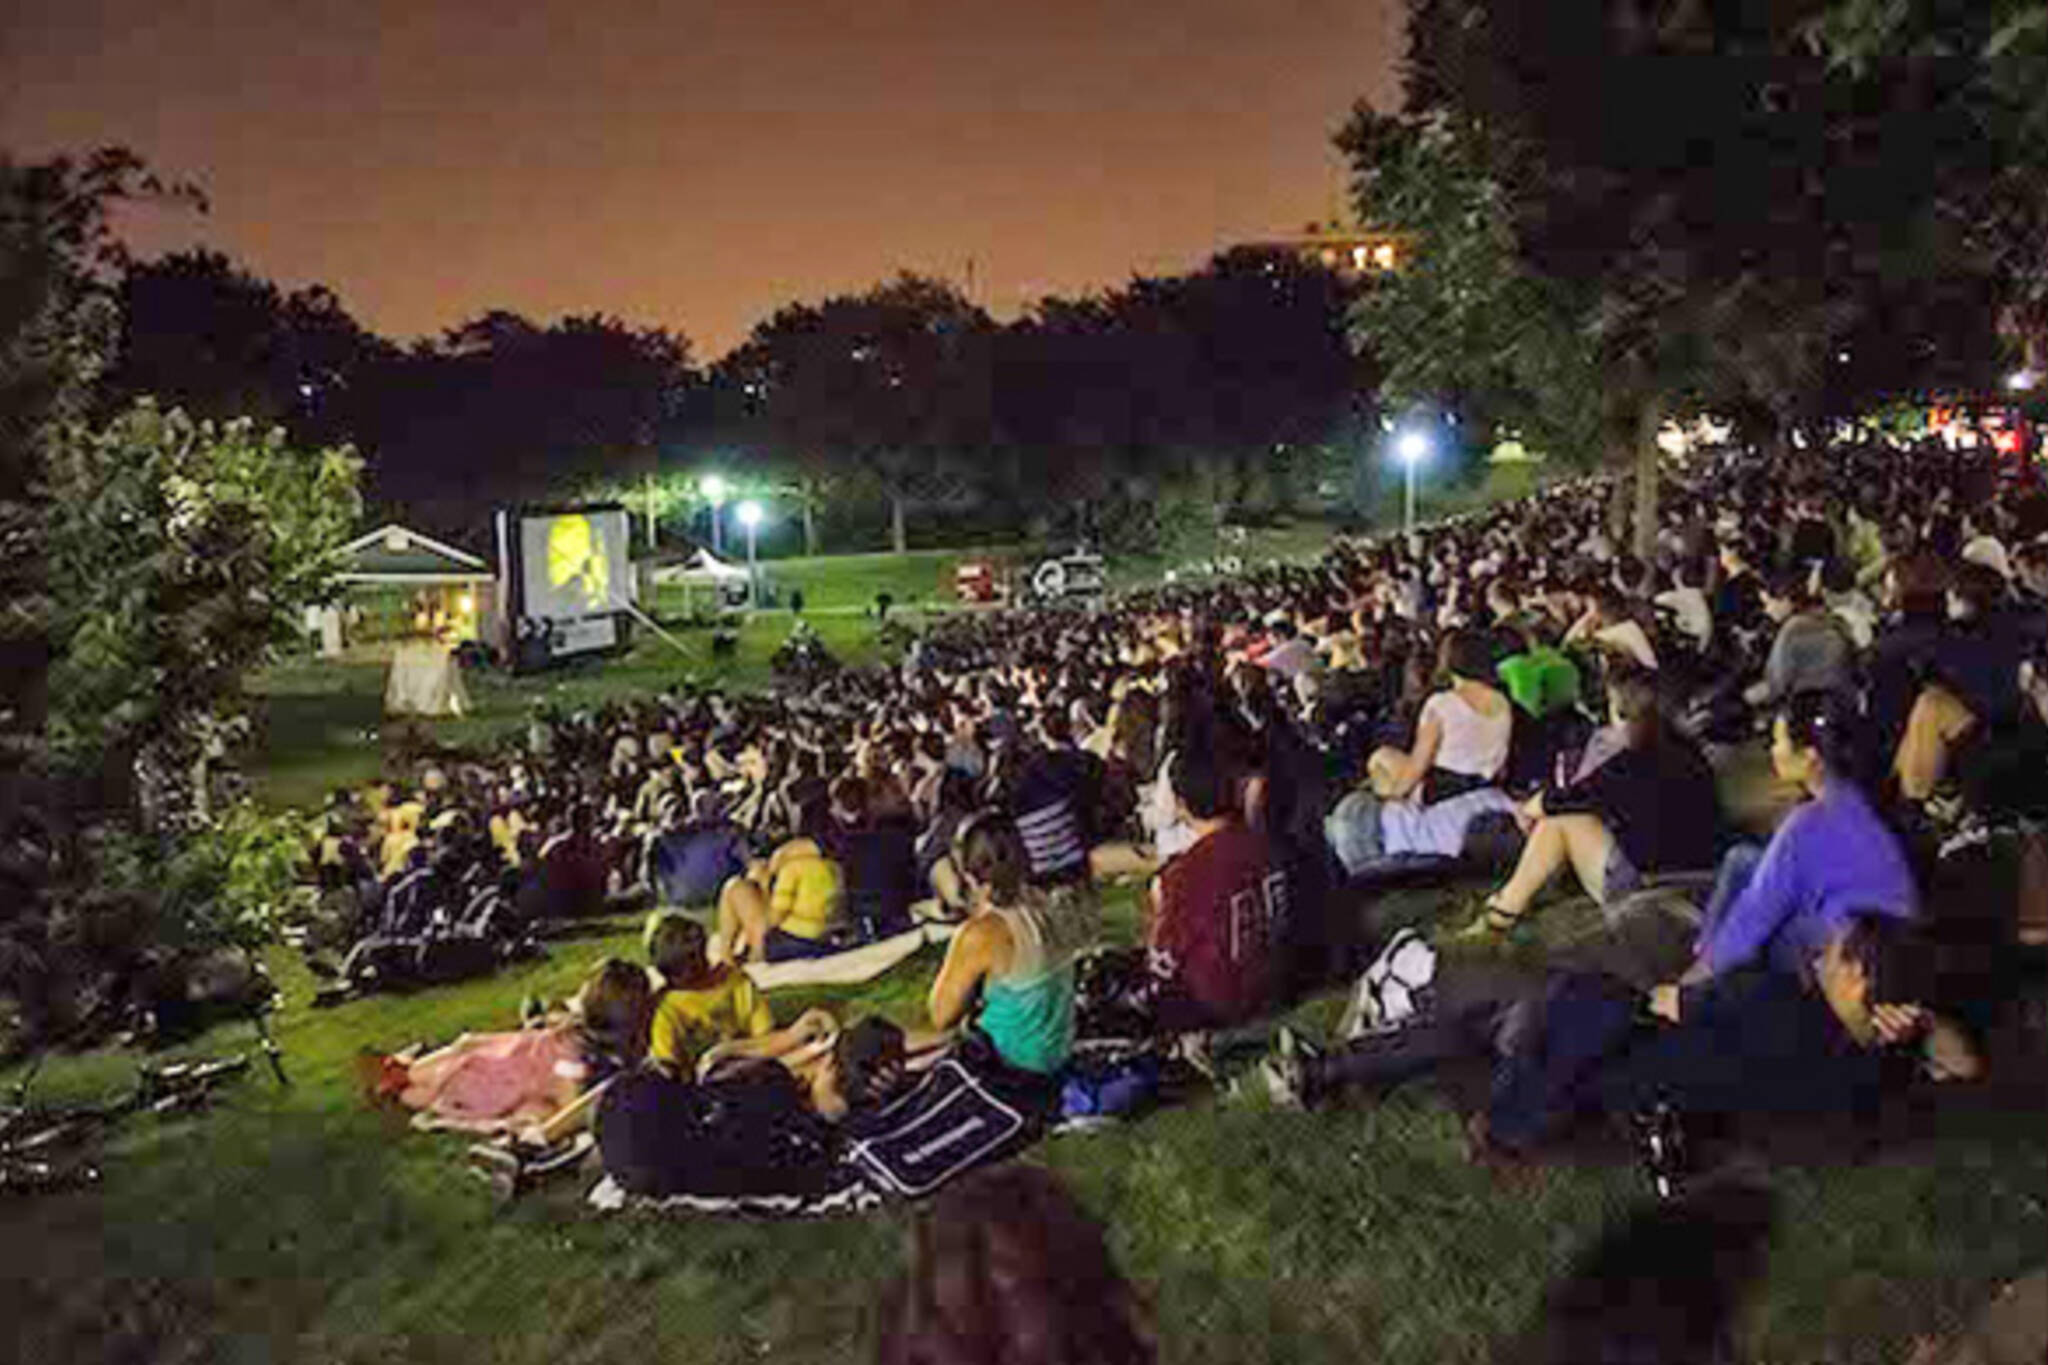 christie pits outdoor movies